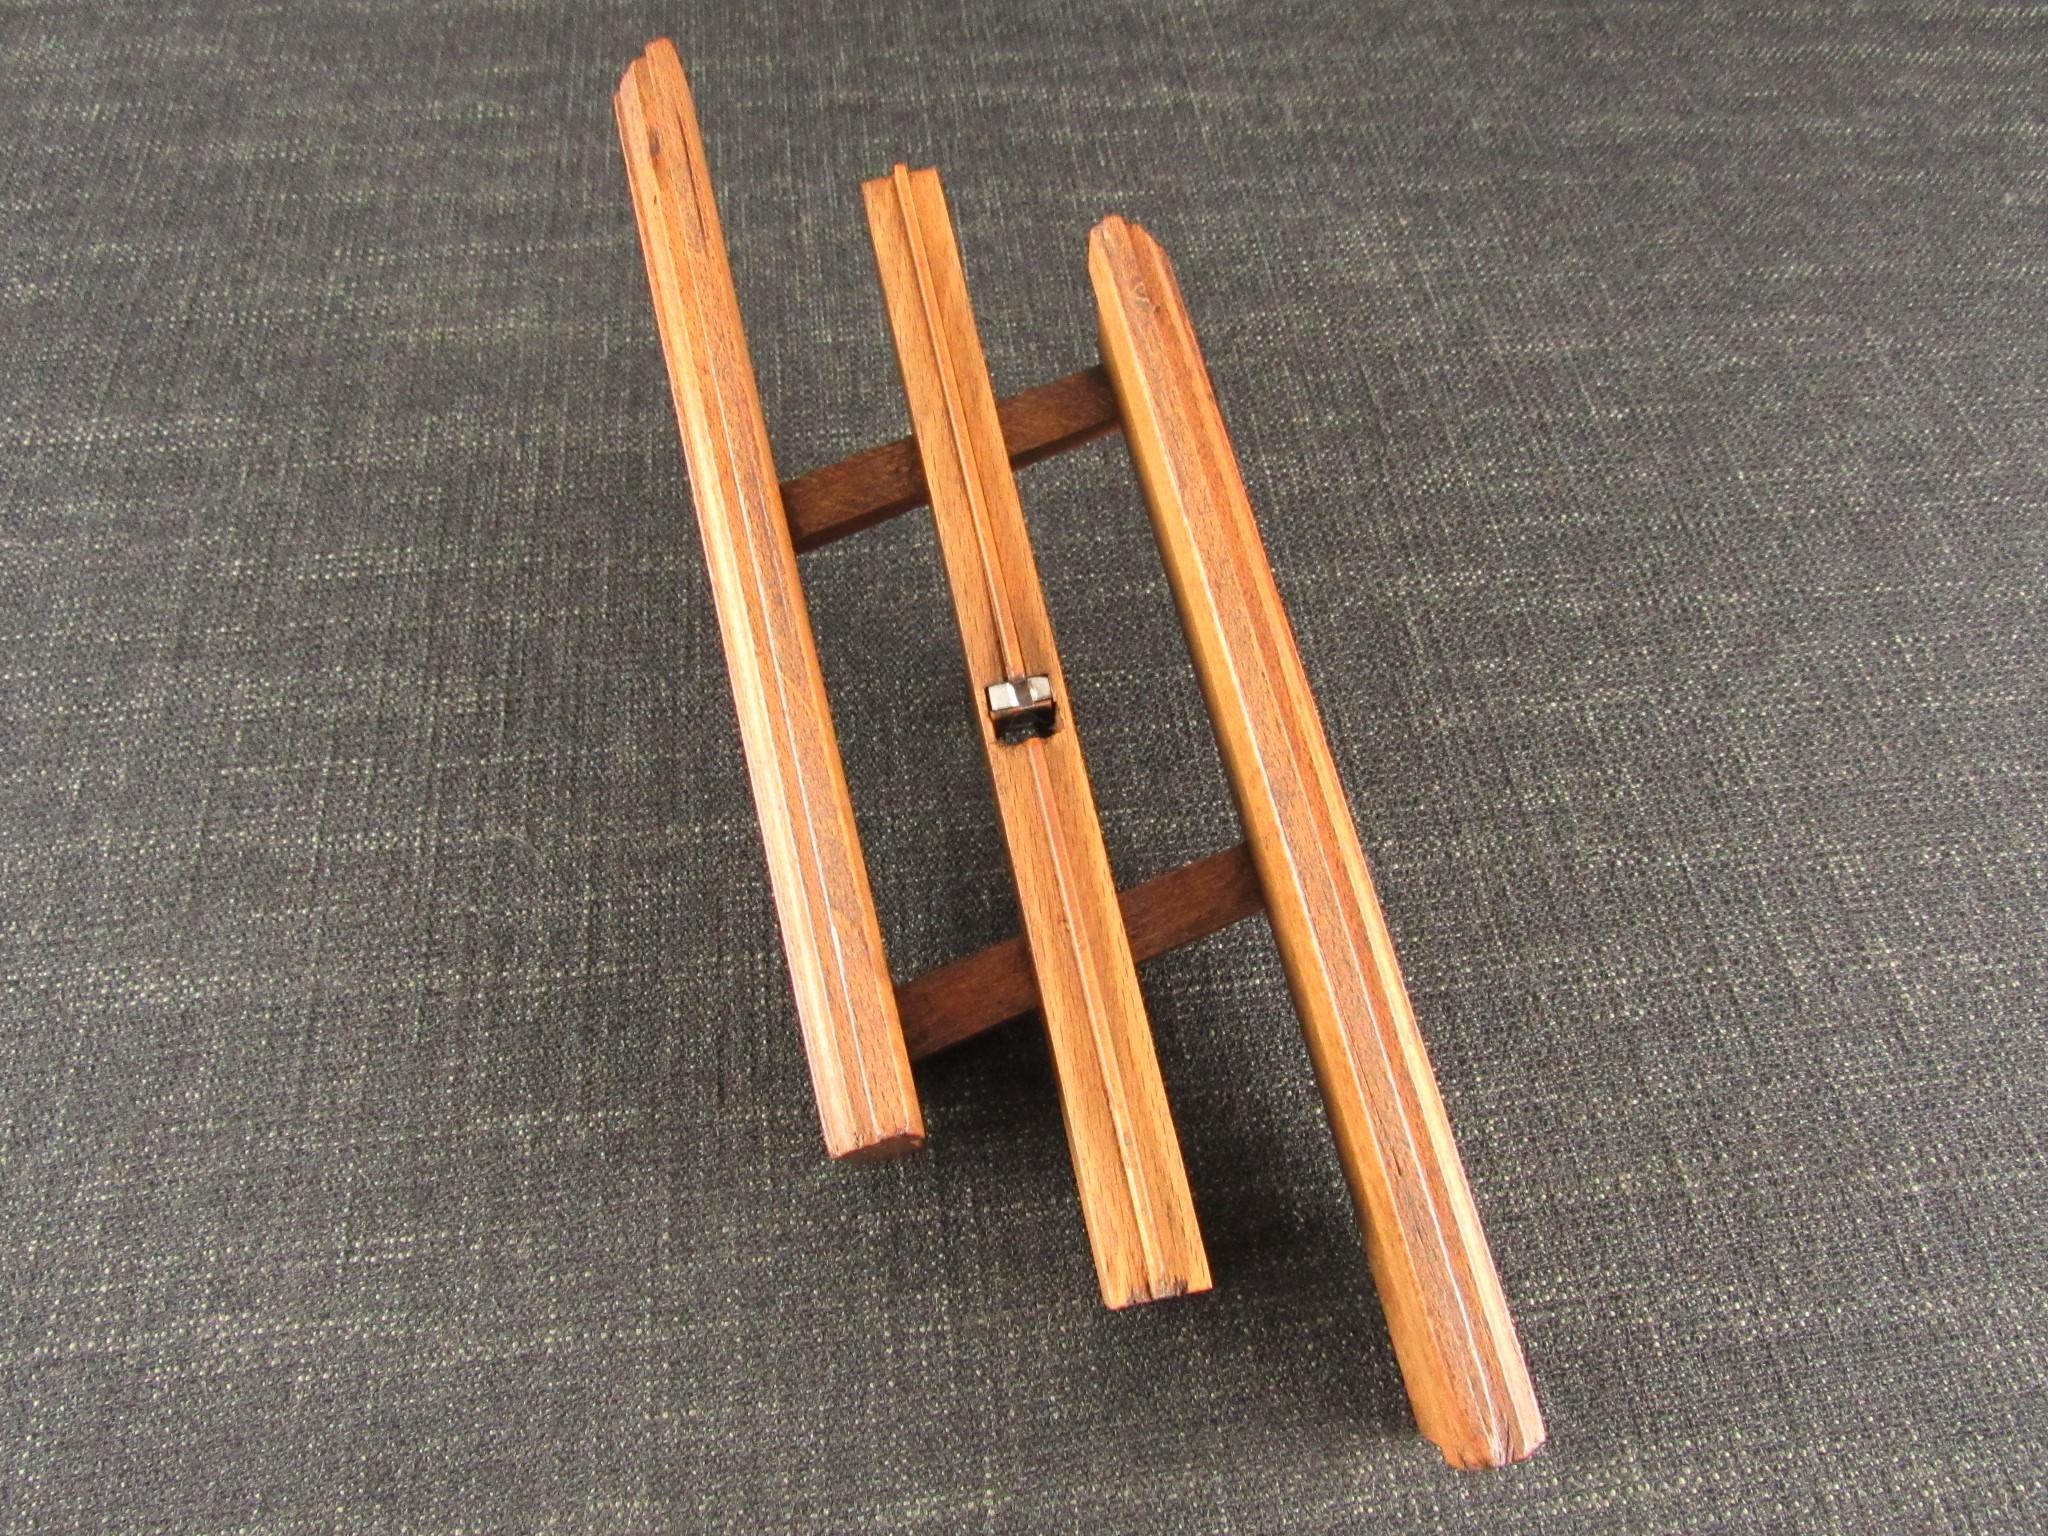 Unusual Wooden Grooving Plane by VARVILL for GP PRESTON